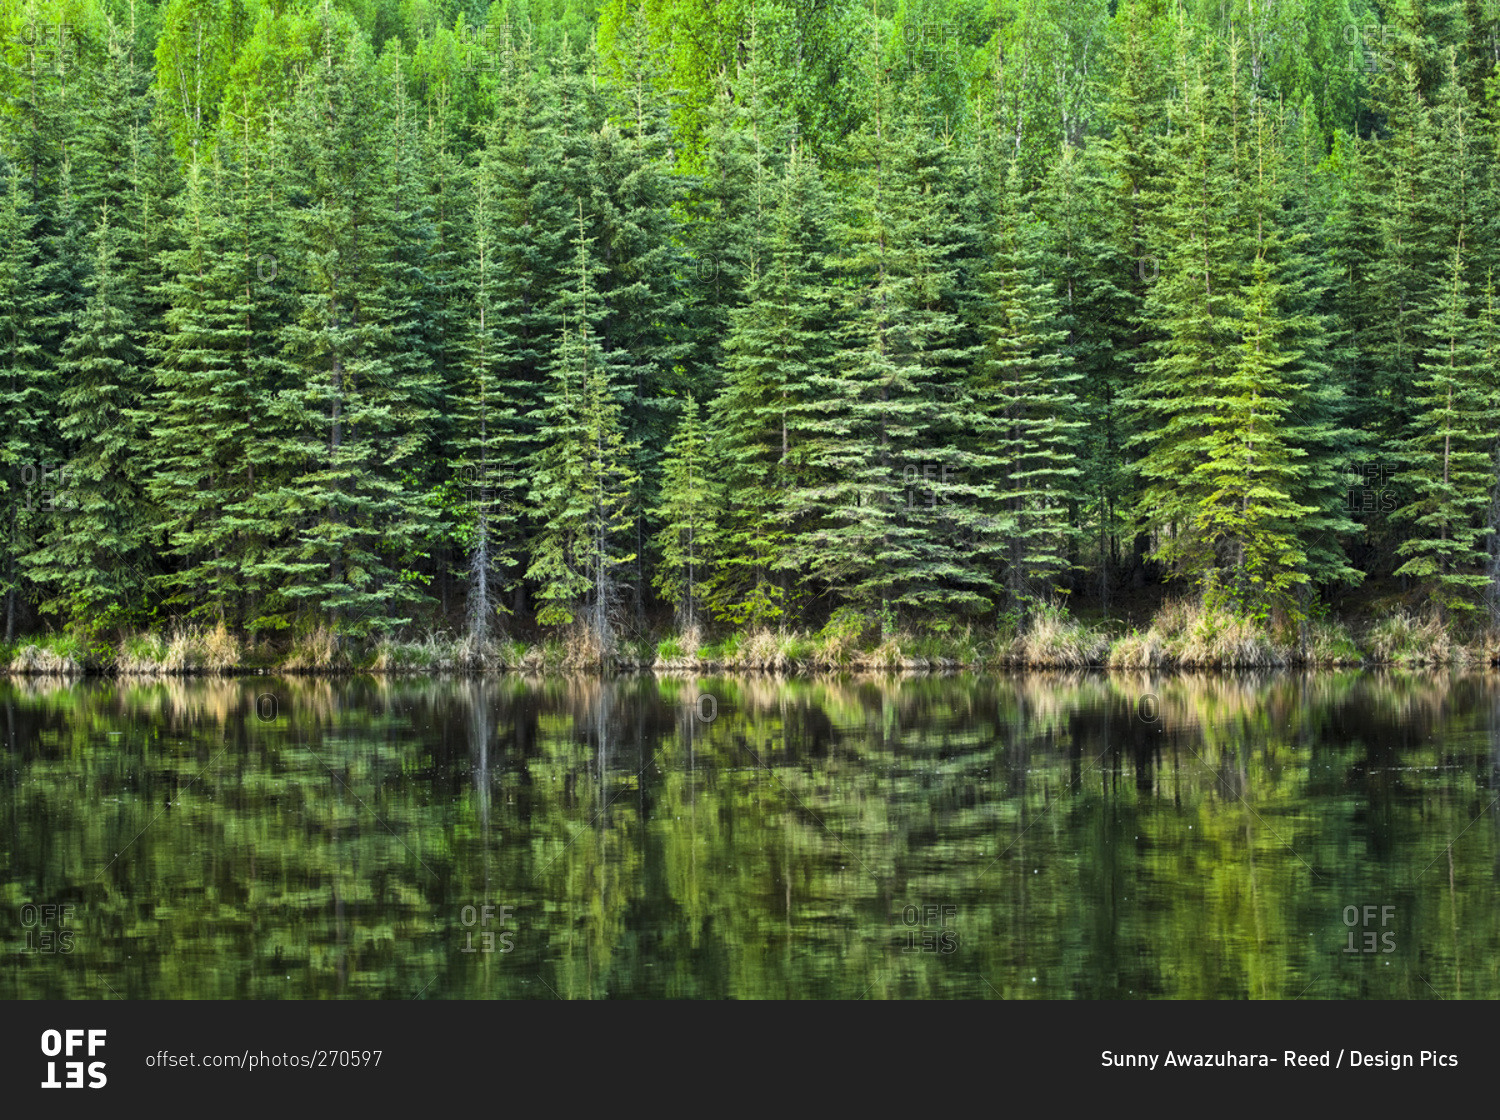 Fresh greens of boreal forest reflect on Beaver Pond, Chena River State Recreation Area, Fairbanks, Alaska, United States of America